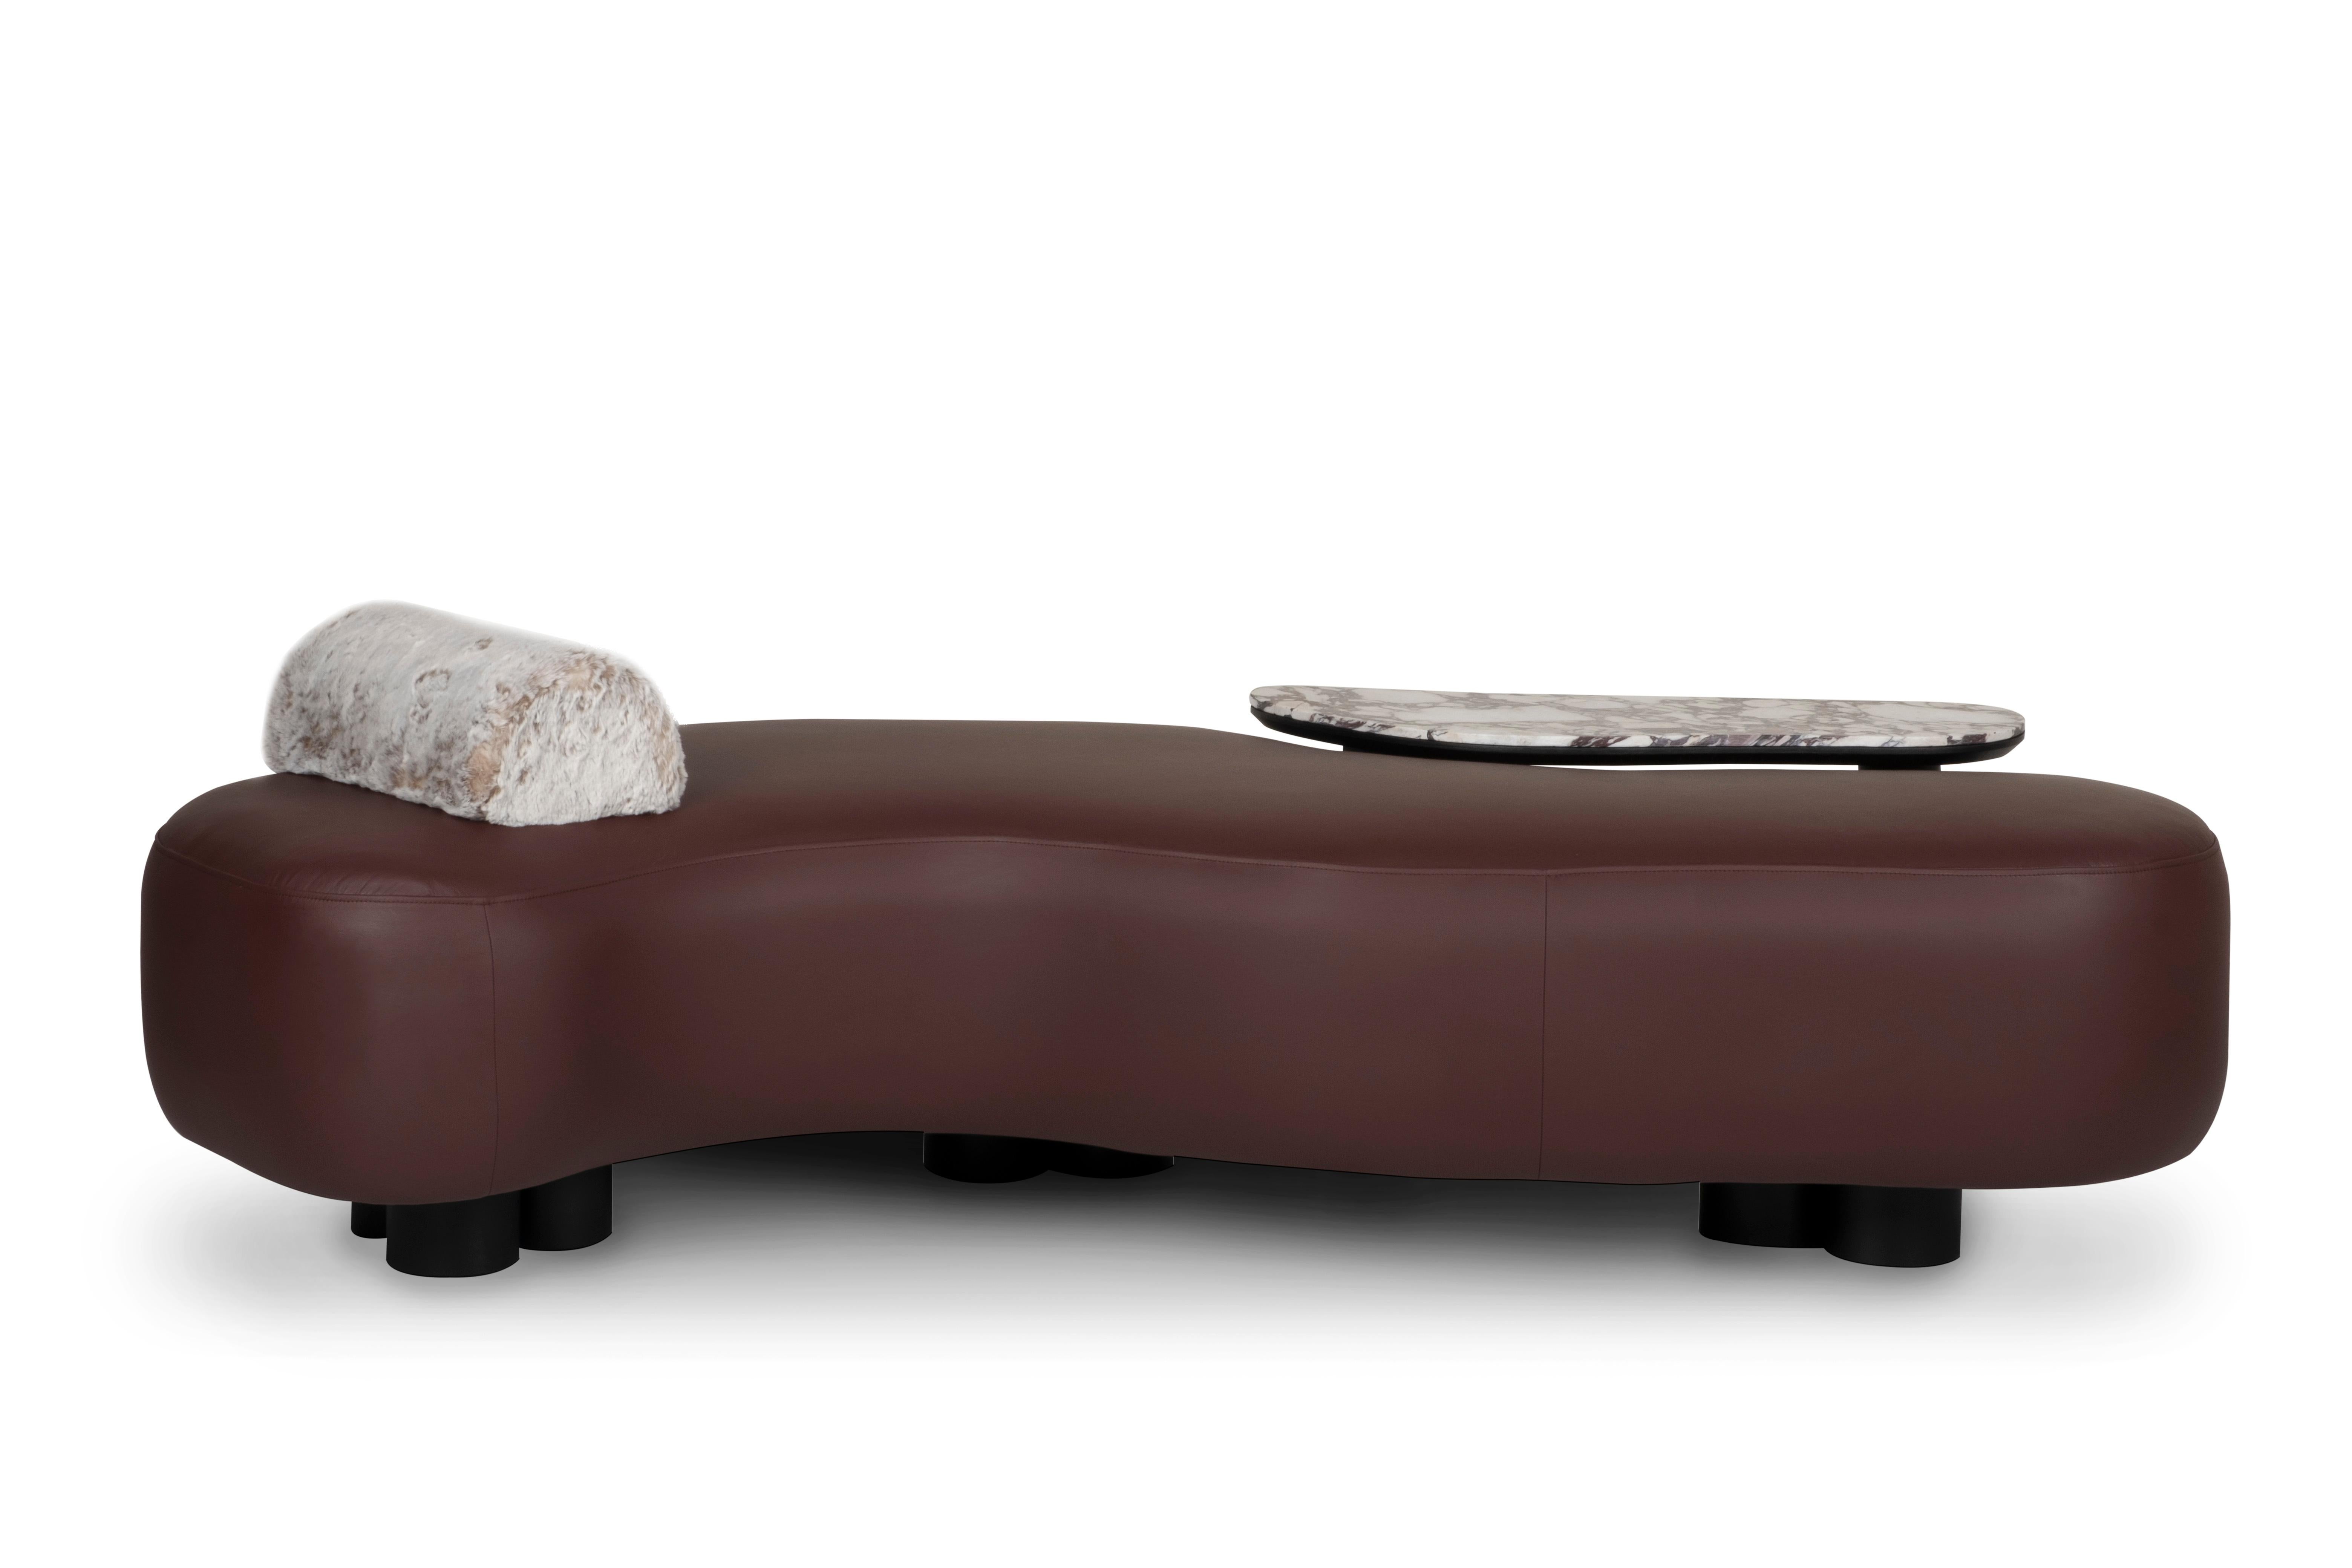 Modern Minho Leather Chaise Lounge, Day Bed, Handmade in Portugal by Greenapple For Sale 3